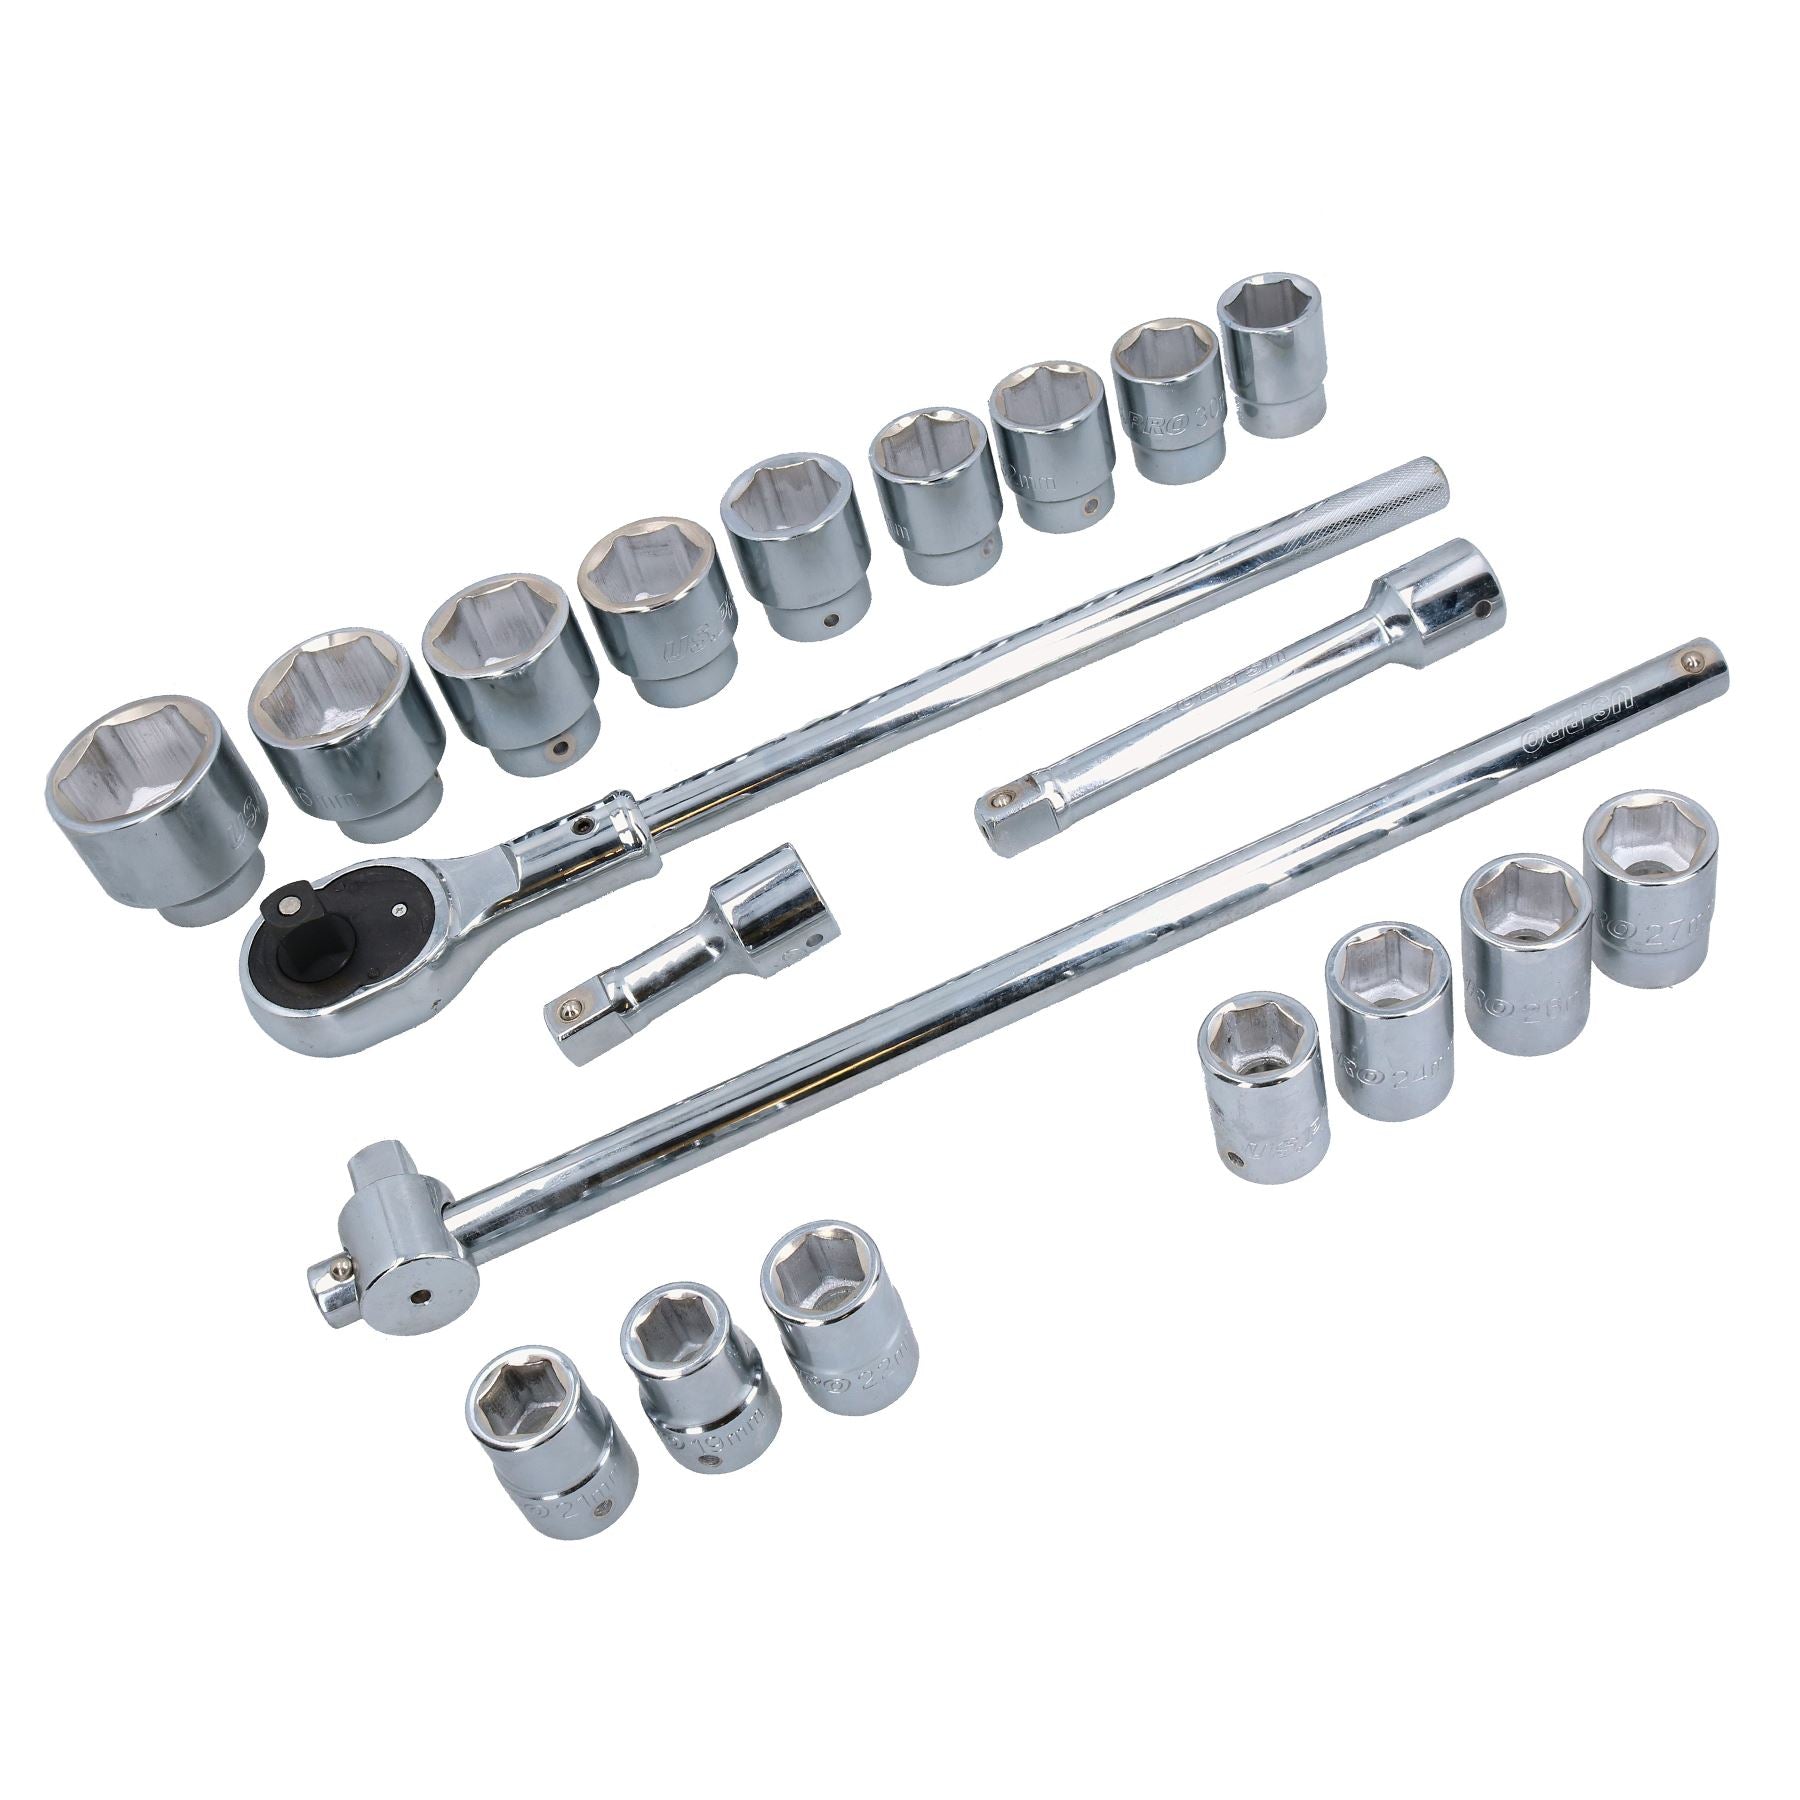 3/4" Drive Metric Socket and Accessory Set 19mm – 50pc 6 Sided 20pc